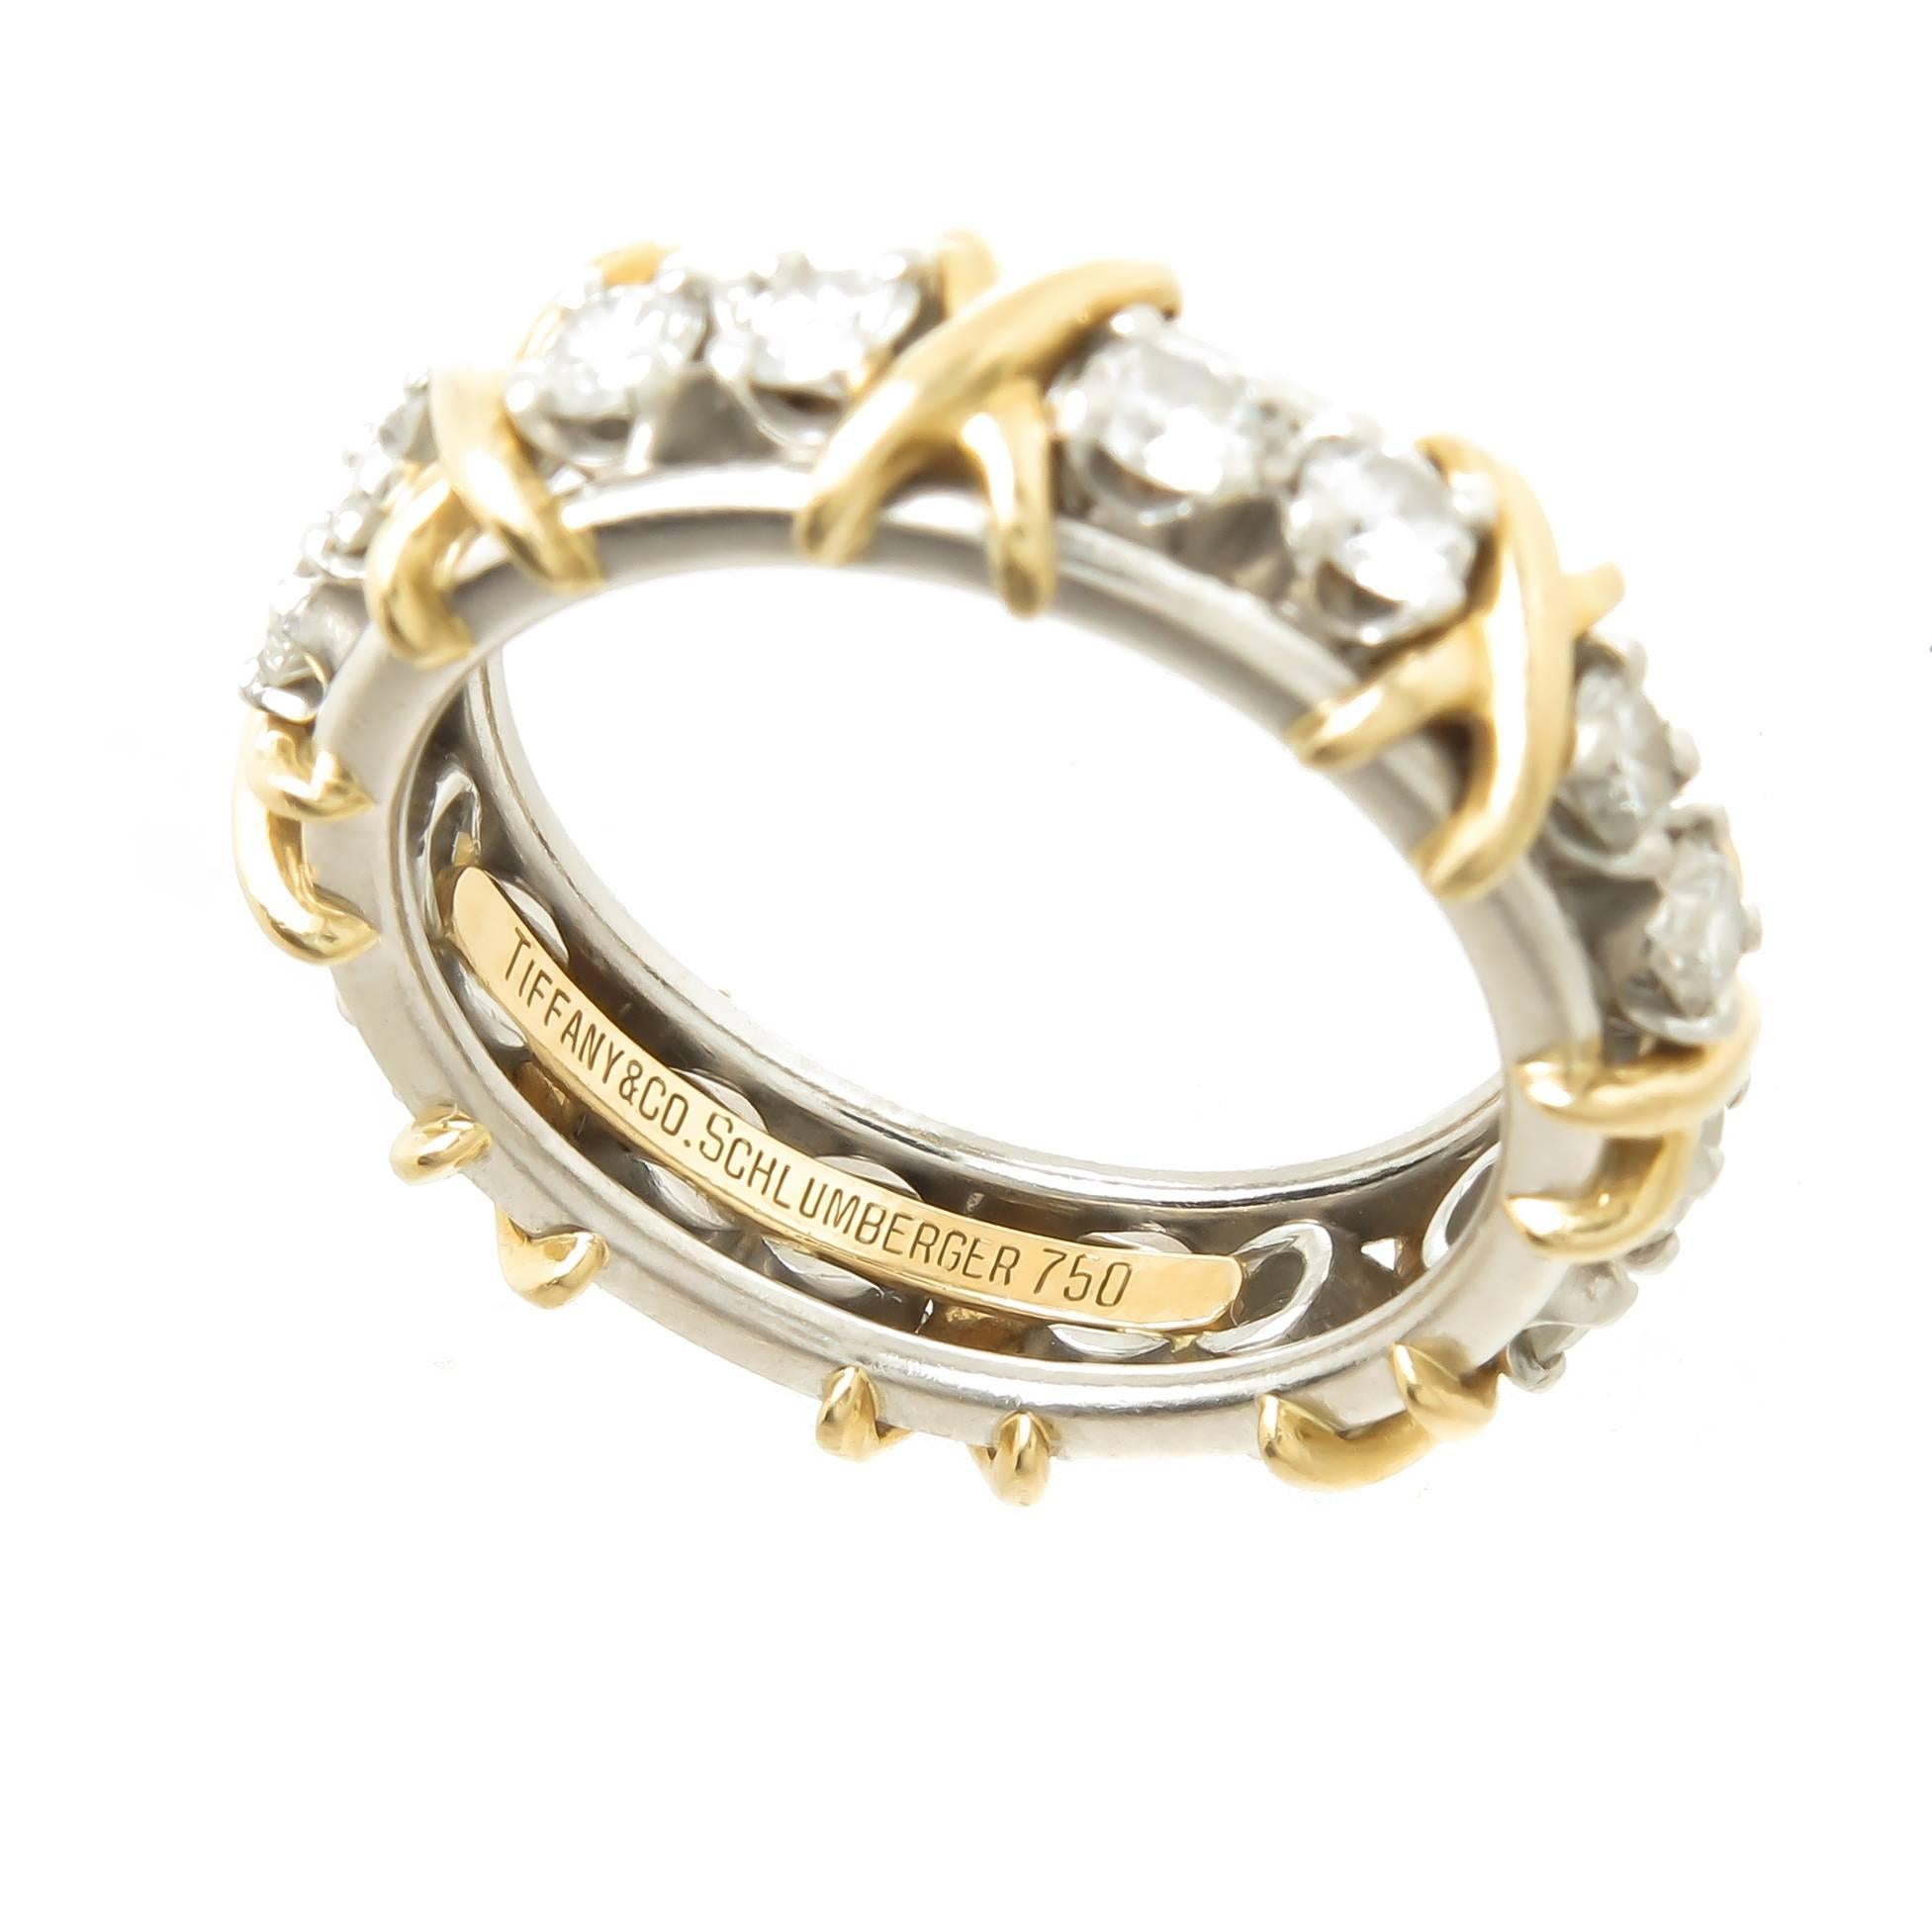 Jean Schlumberger for Tiffany & Company, Platinum and 18k Yellow Gold X Band Ring. Set with 18 Round Brilliant cut Diamonds totaling 1.32 Carats and grading as G in color and VS in Clarity. measures 5 MM wide and is a finger size 4. Comes in